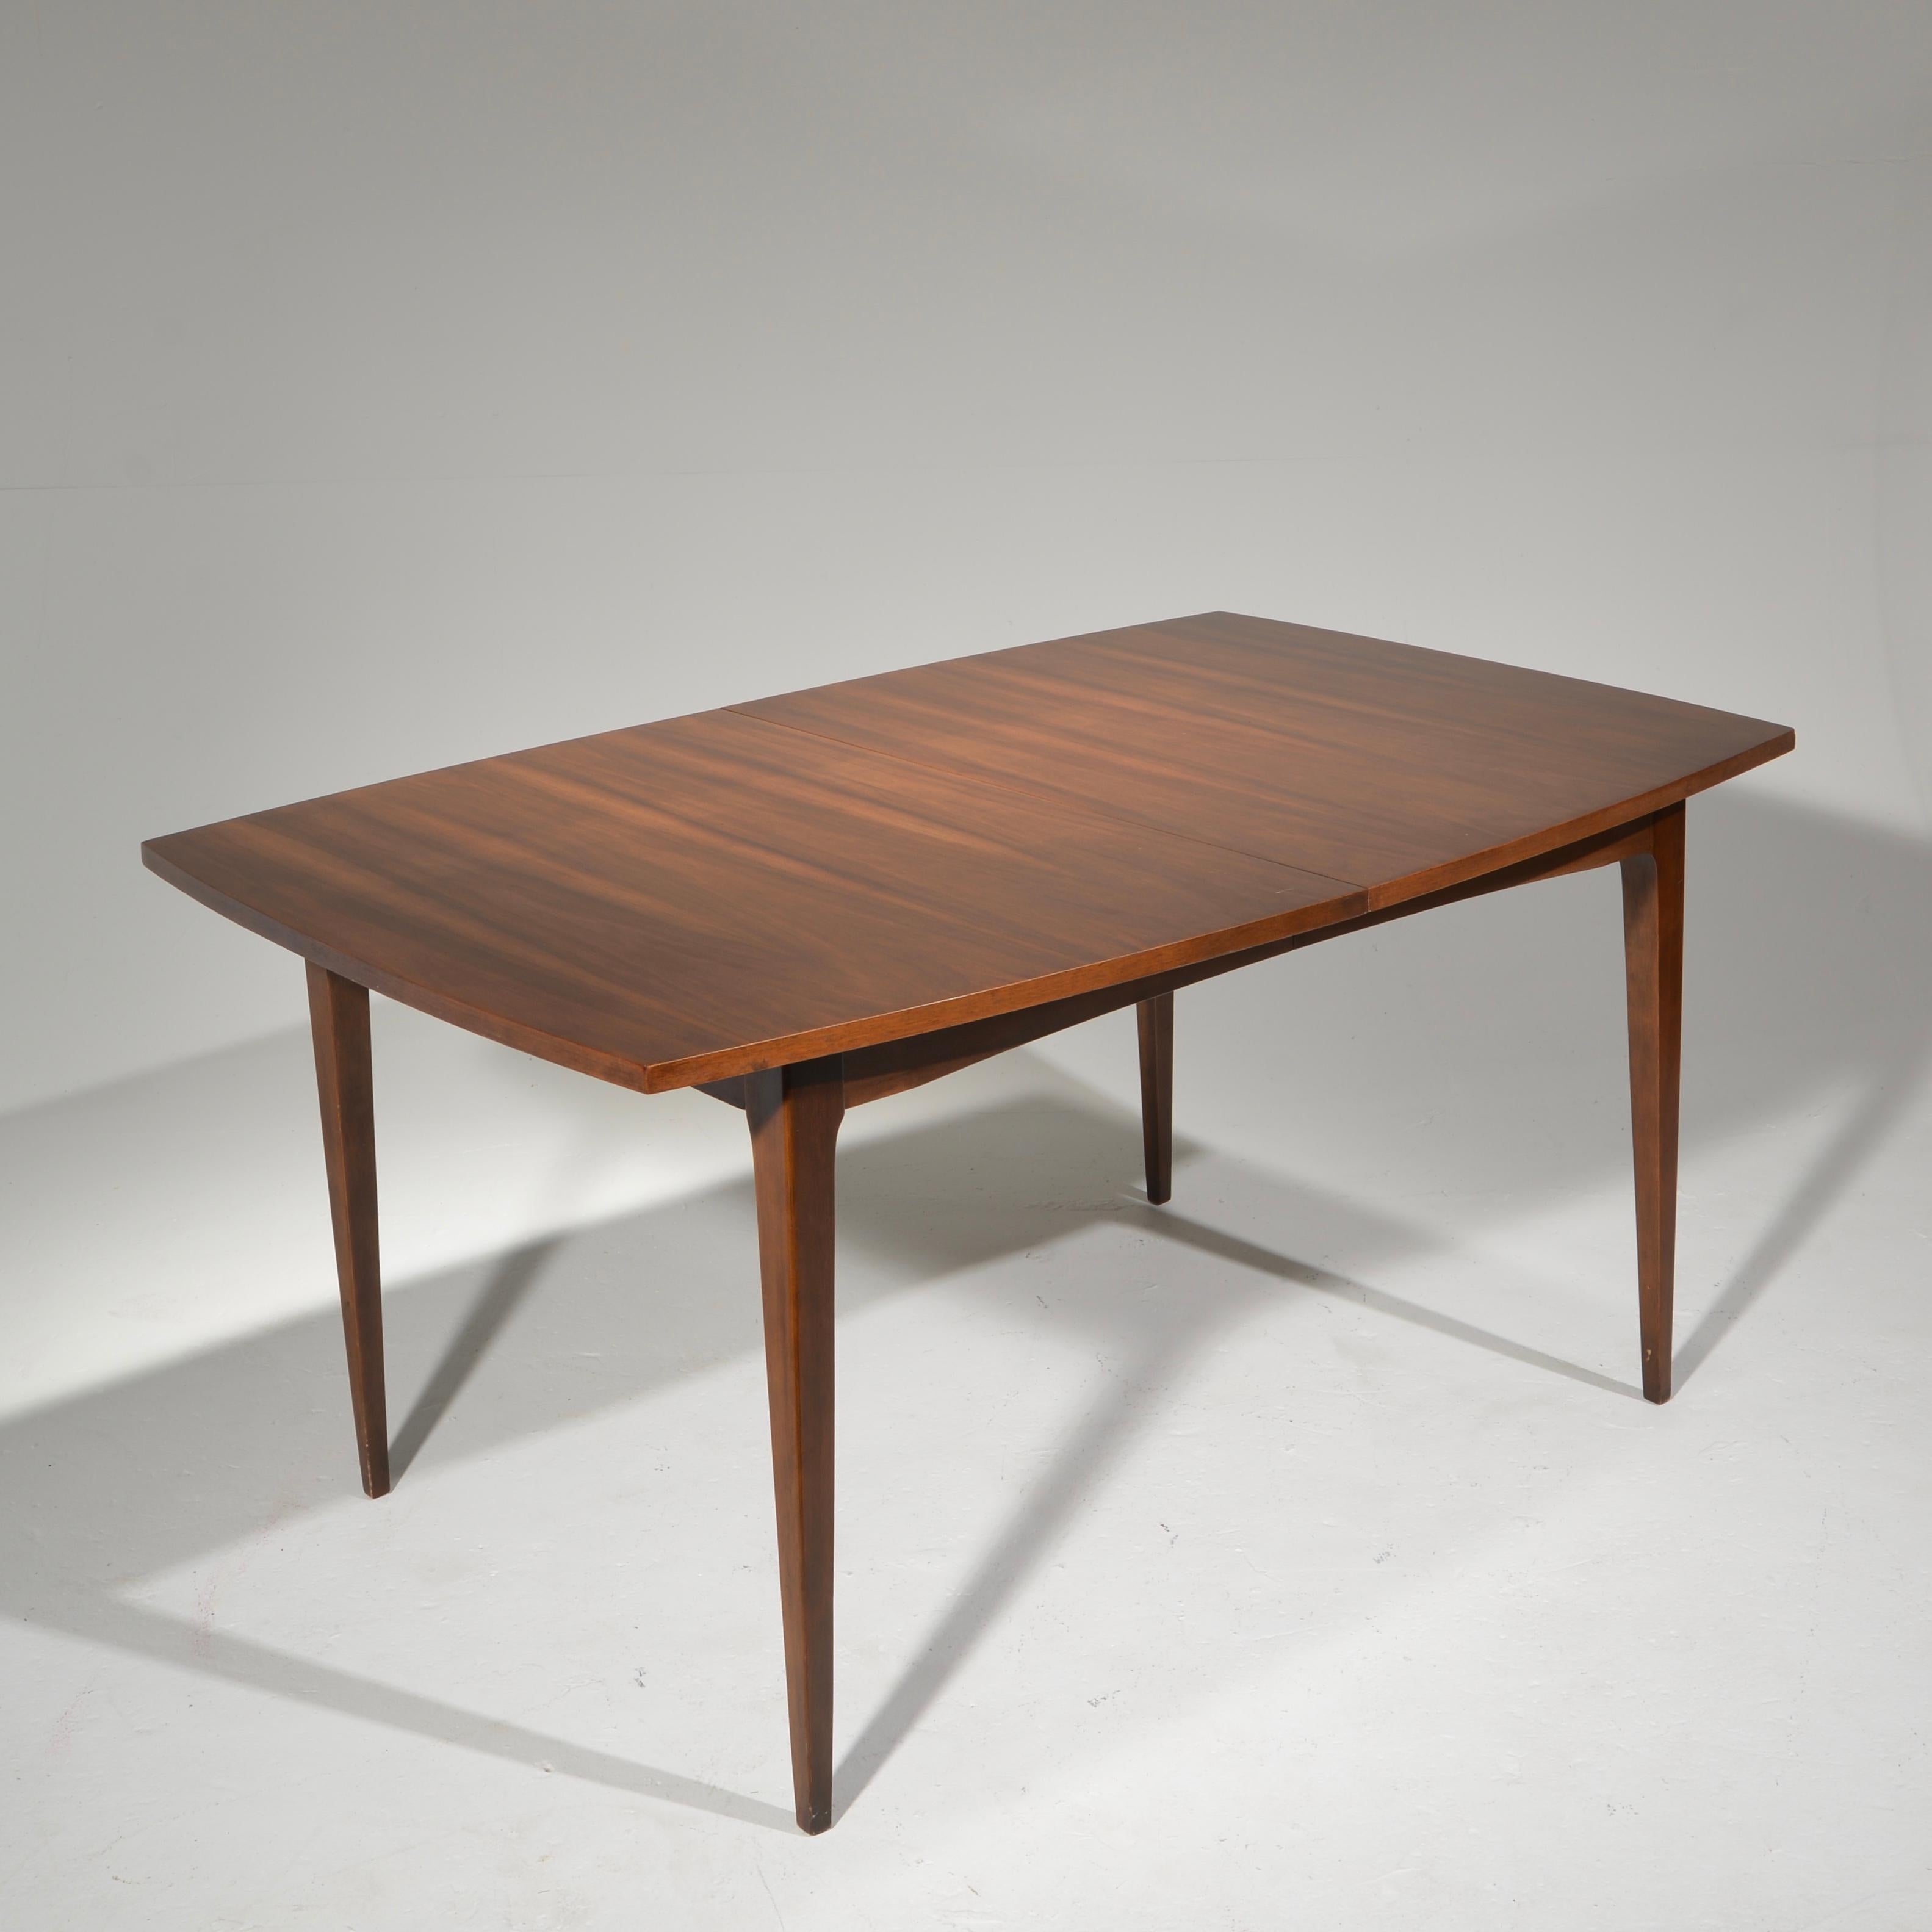 Beautiful midcentury walnut dining table that extends and collapses to fit your needs perfectly.